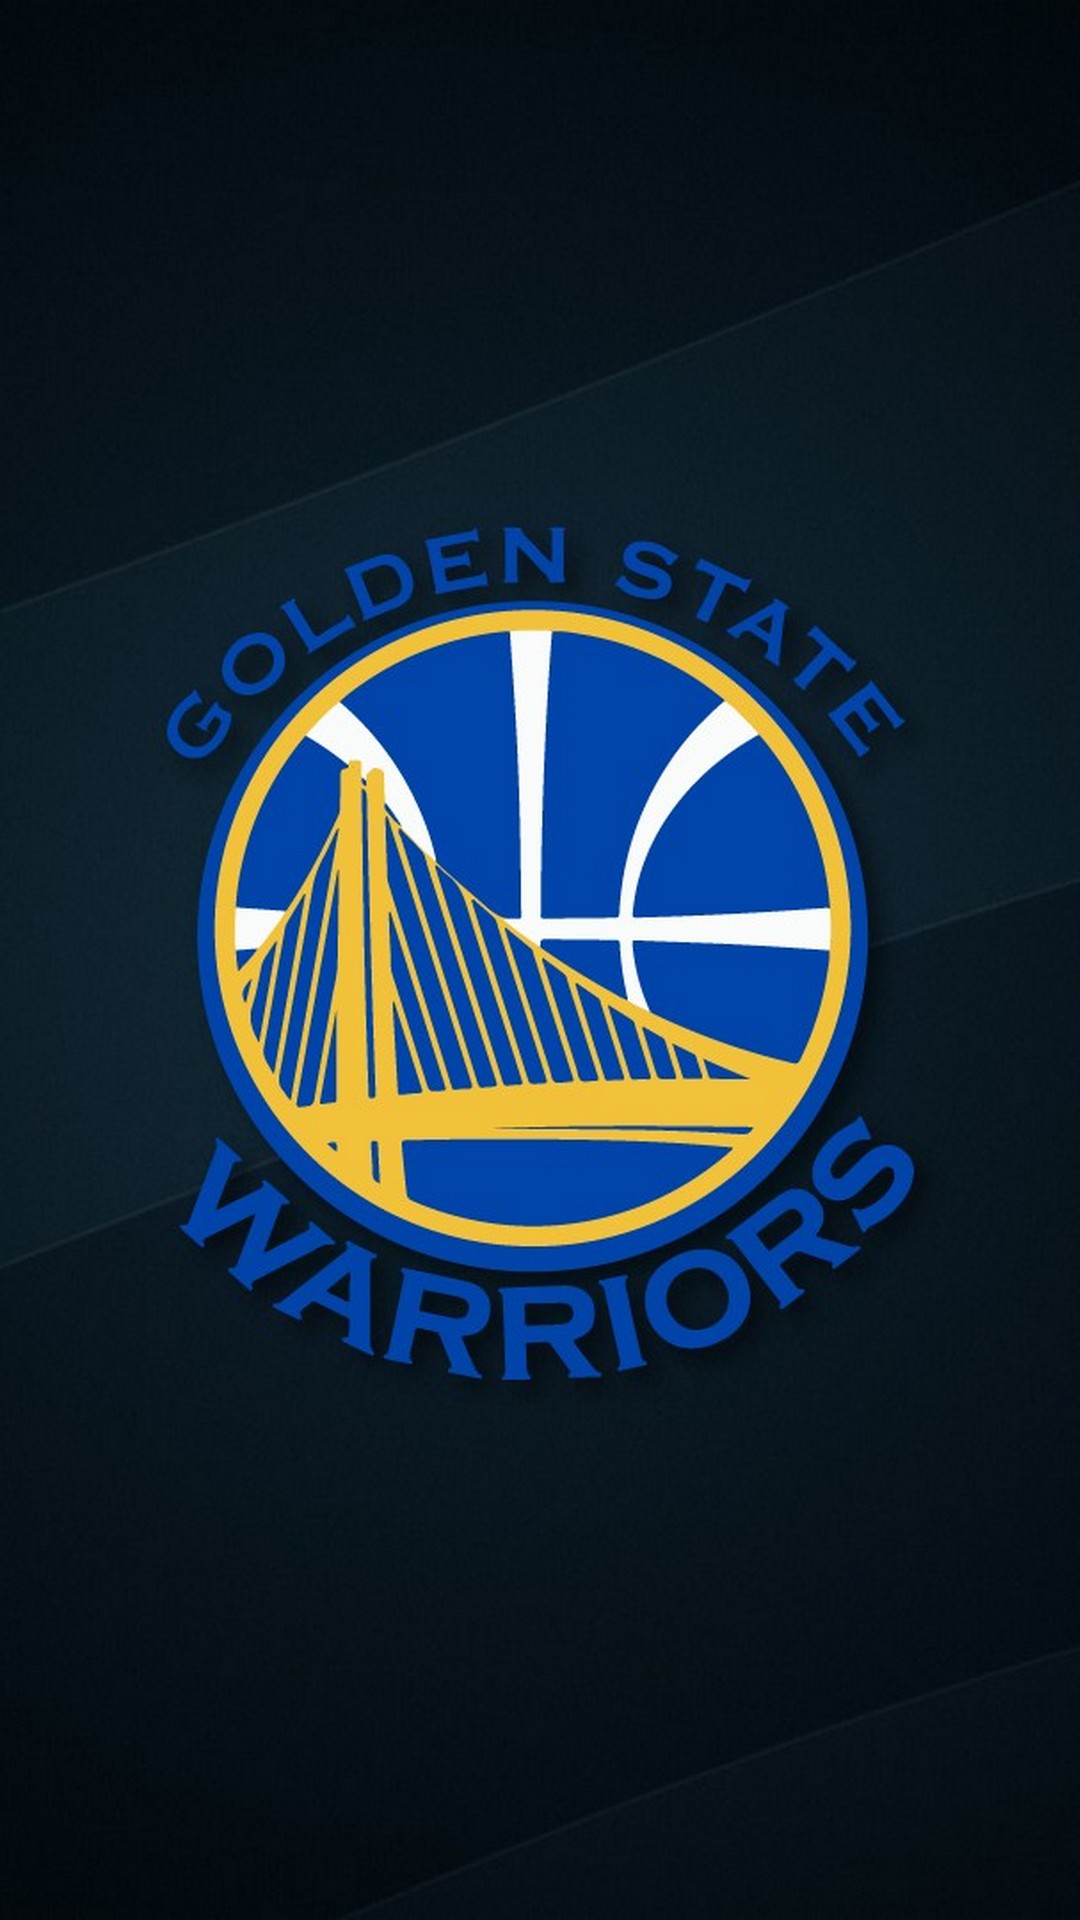 Wallpaper Golden State iPhone with image dimensions 1080x1920 pixel. You can make this wallpaper for your Desktop Computer Backgrounds, Windows or Mac Screensavers, iPhone Lock screen, Tablet or Android and another Mobile Phone device